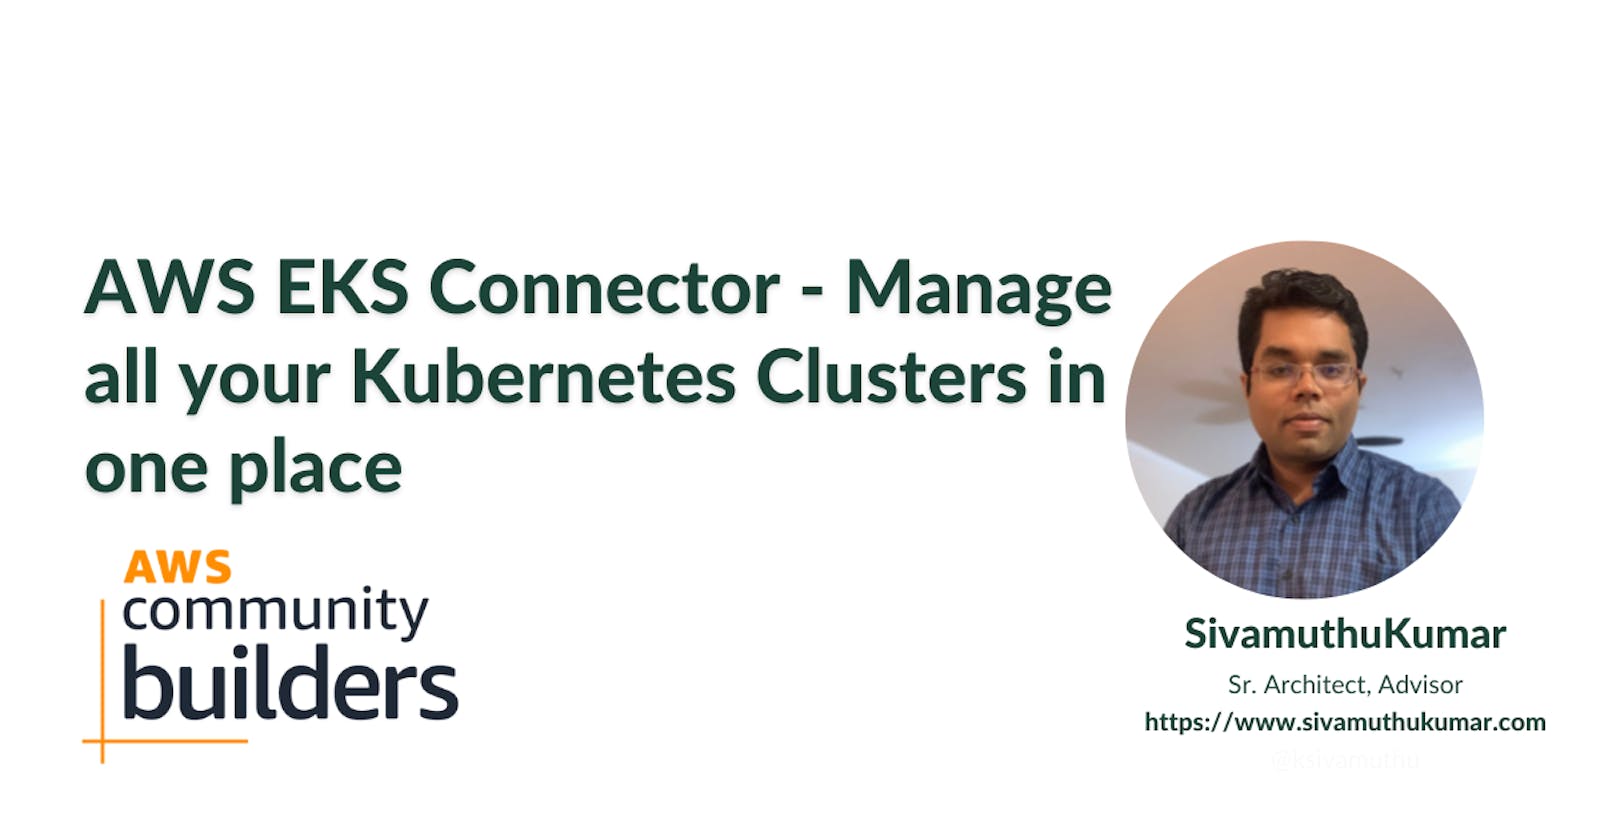 AWS EKS Connector - Manage all your Kubernetes Clusters in one place